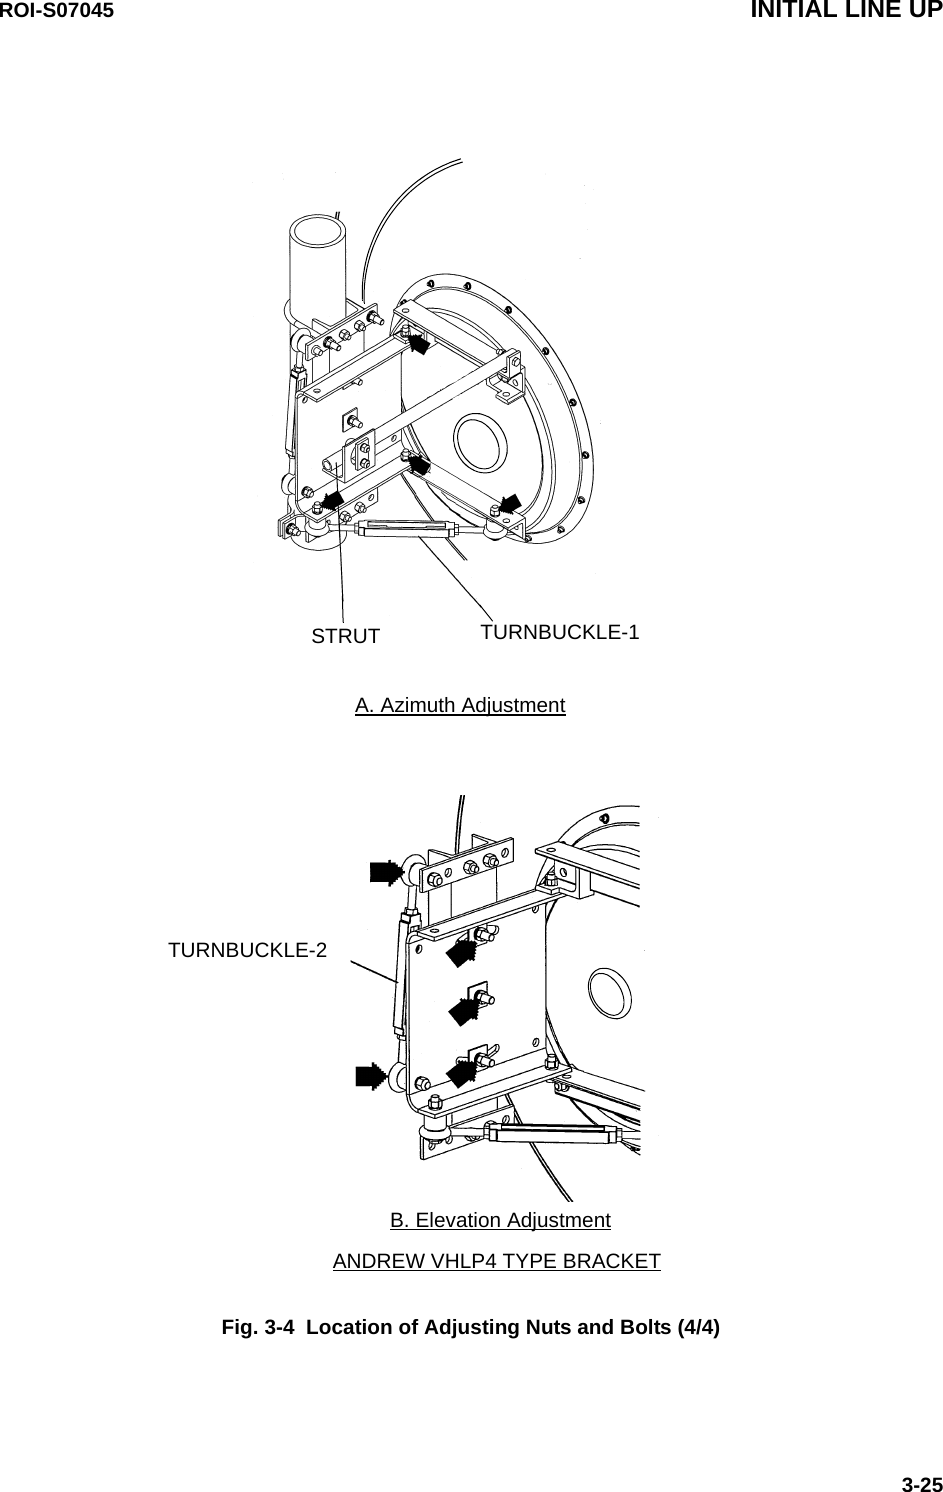 ROI-S07045 INITIAL LINE UP3-25Fig. 3-4  Location of Adjusting Nuts and Bolts (4/4)STRUT TURNBUCKLE-1A. Azimuth AdjustmentTURNBUCKLE-2ANDREW VHLP4 TYPE BRACKETB. Elevation Adjustment